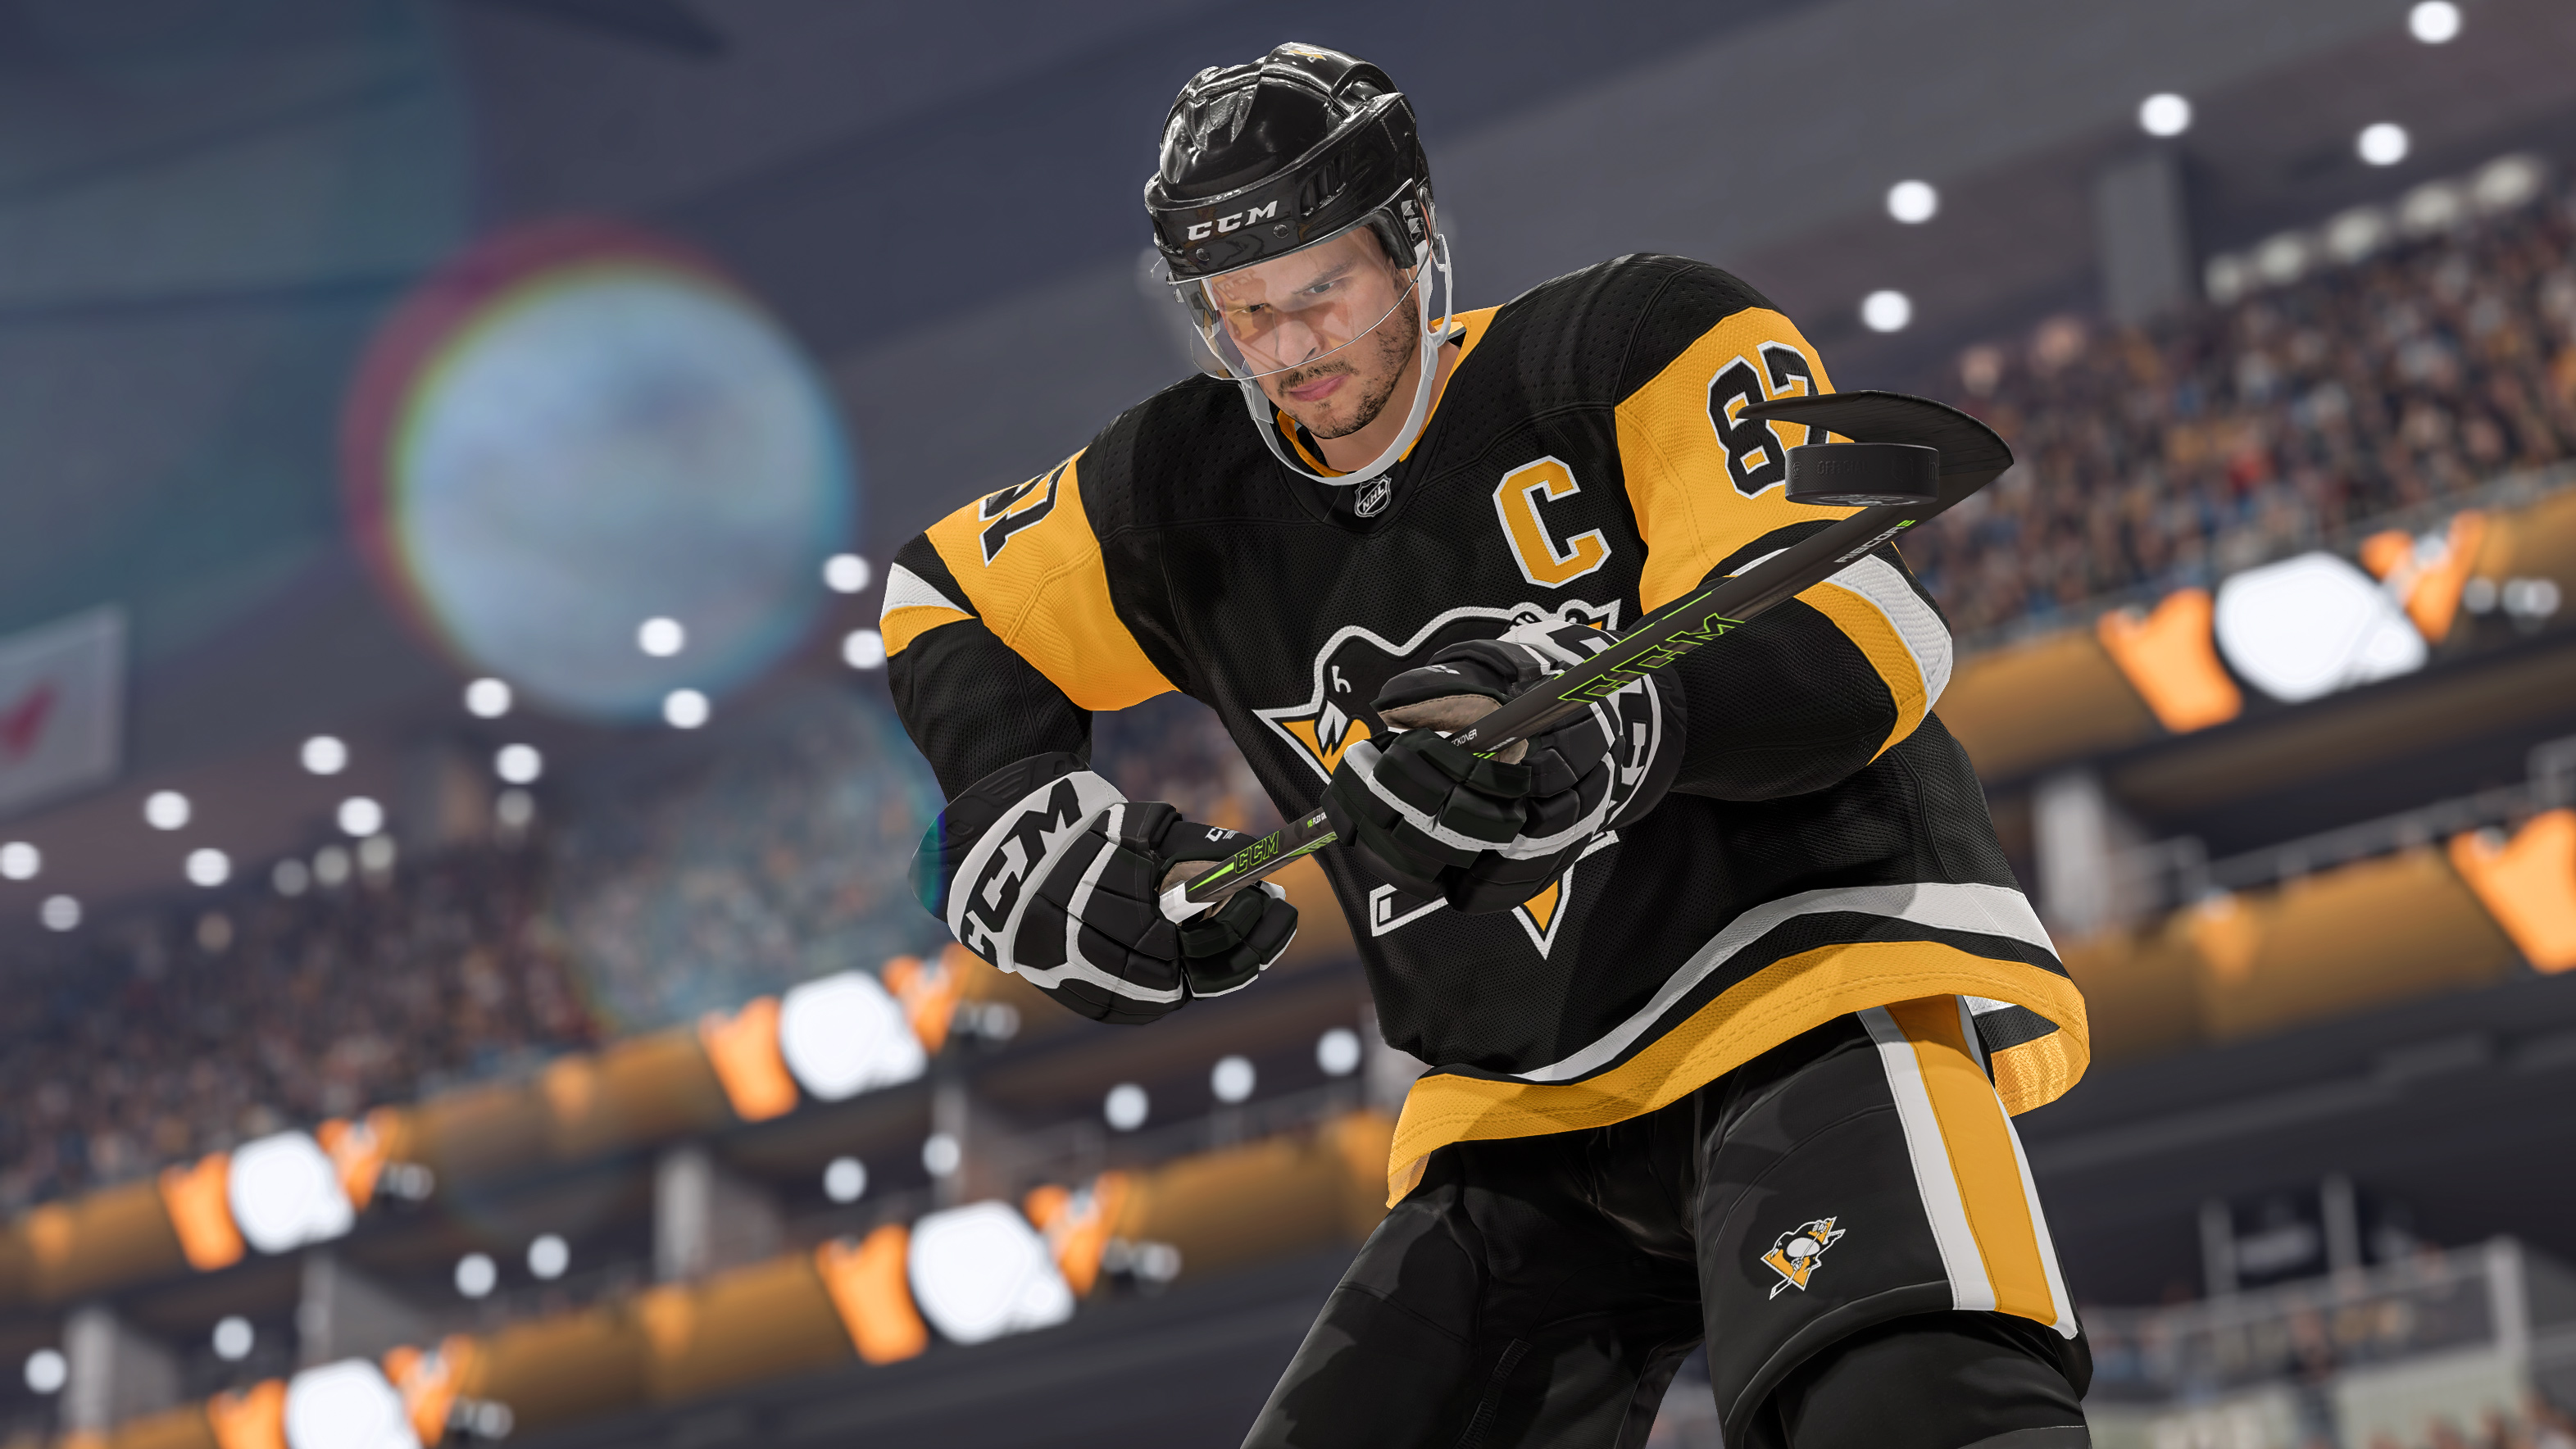 With superstars and storylines, NHL 22 makers aim for longer-lasting player careers